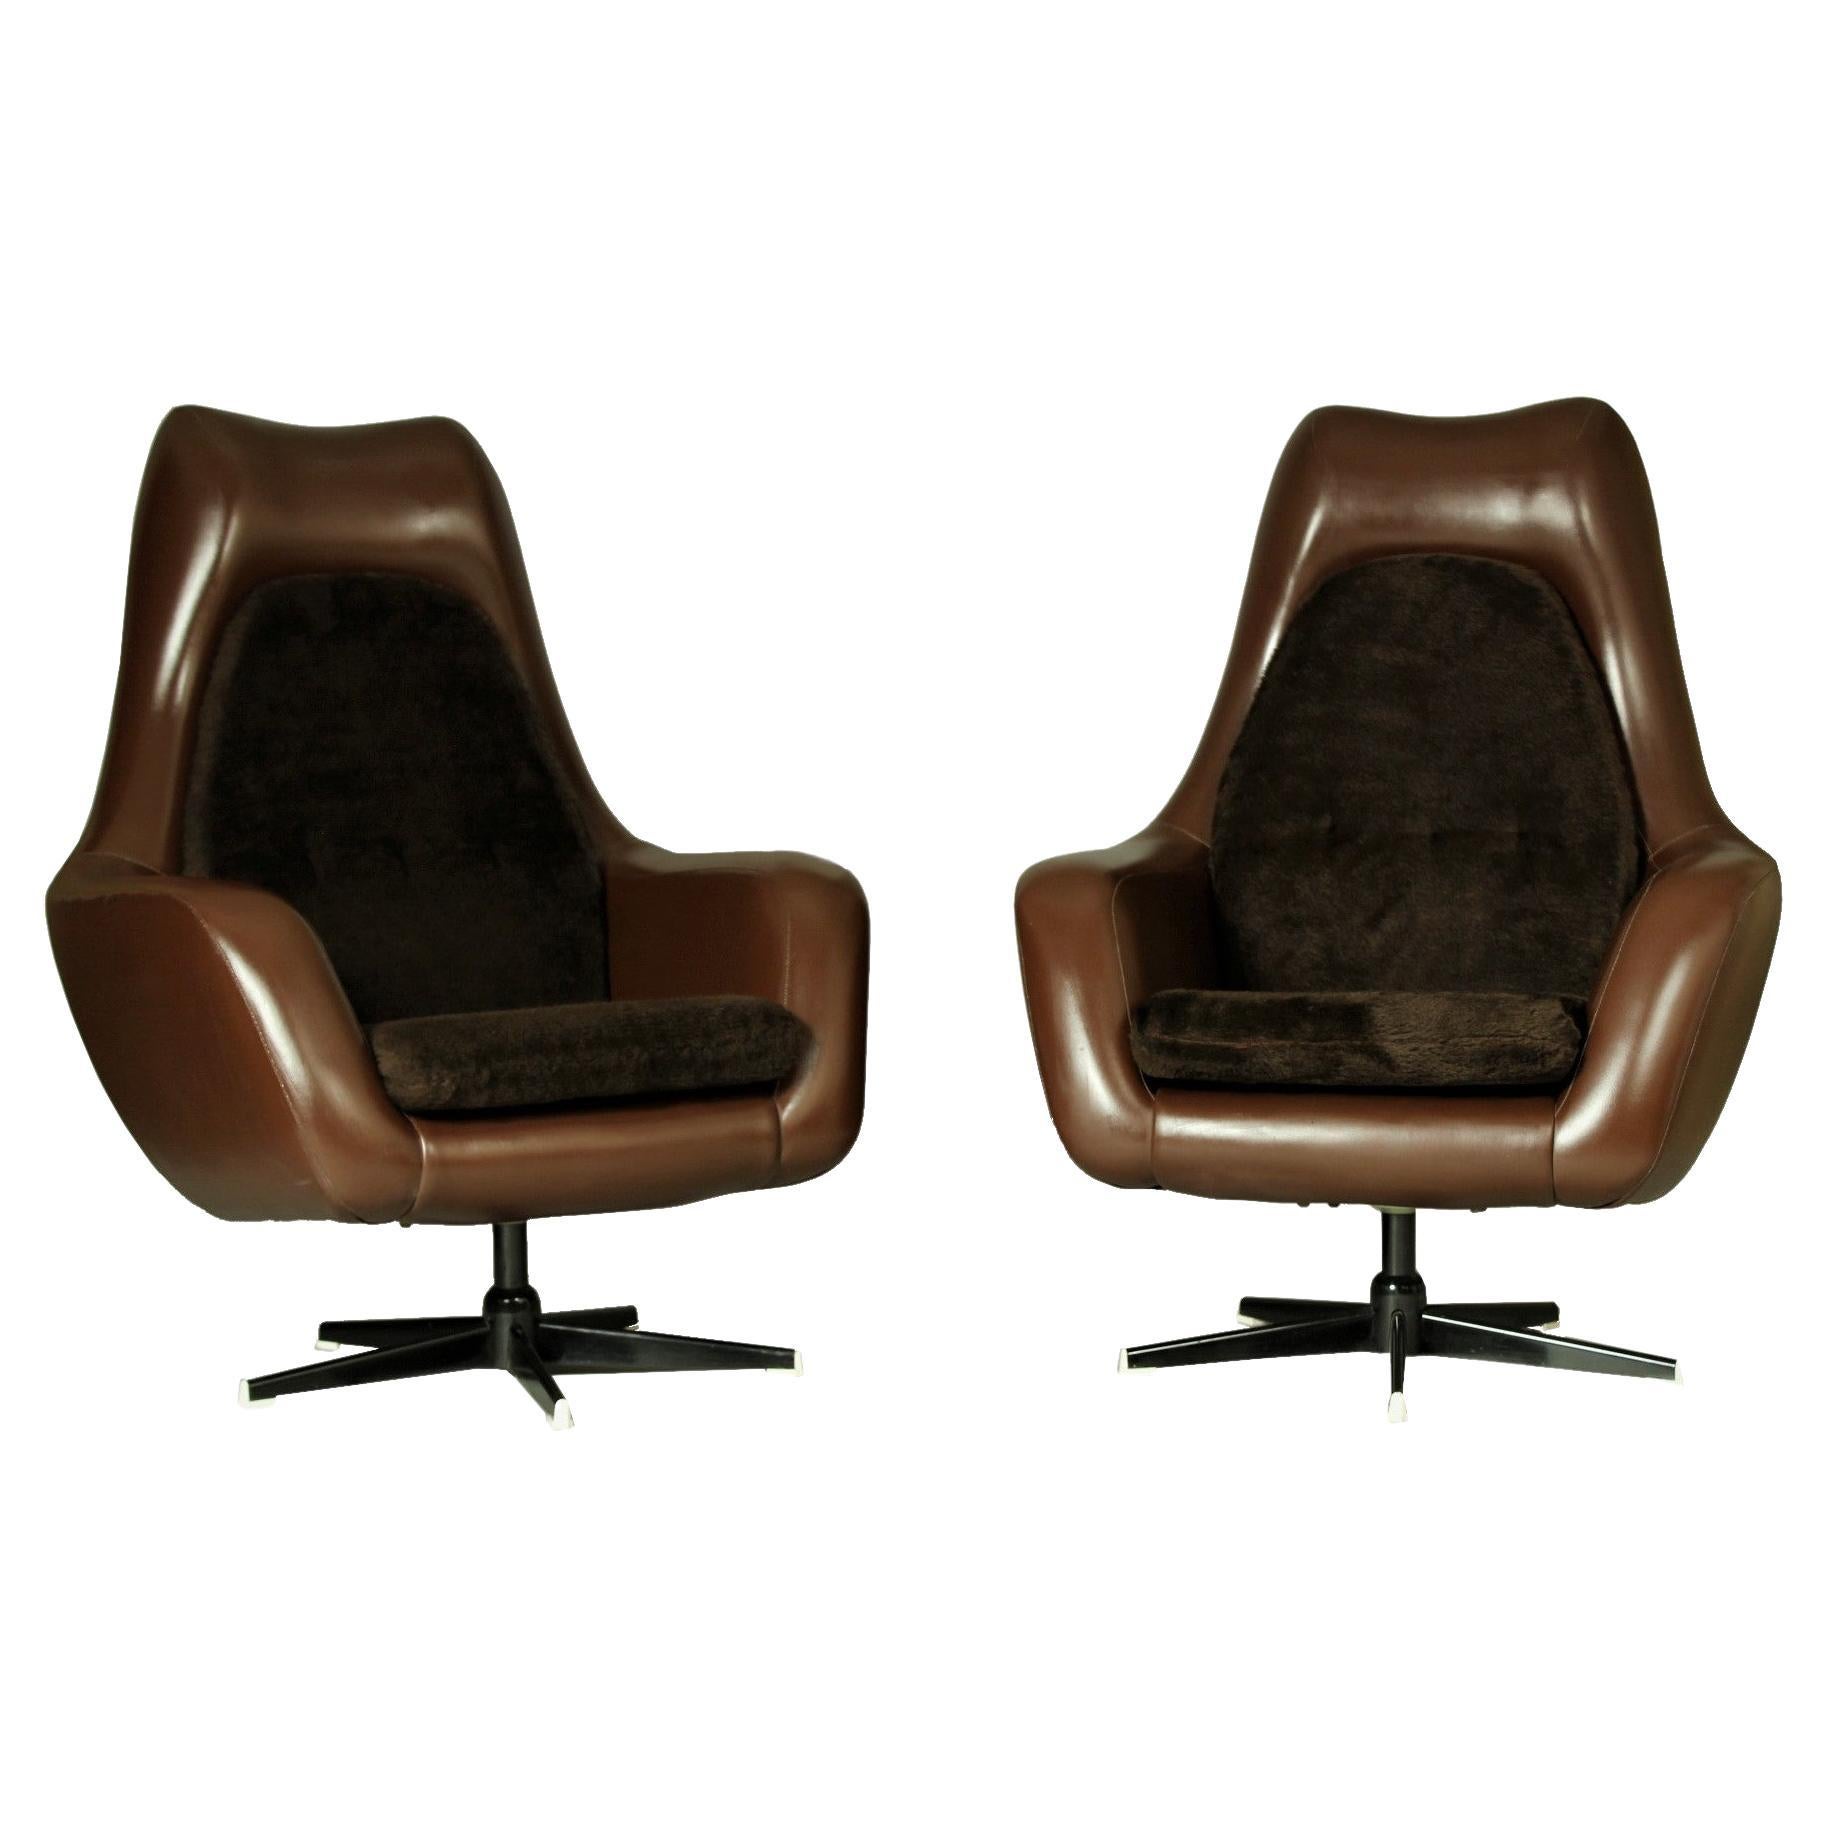 Pair of Swivel Egg Chairs, 1970s For Sale